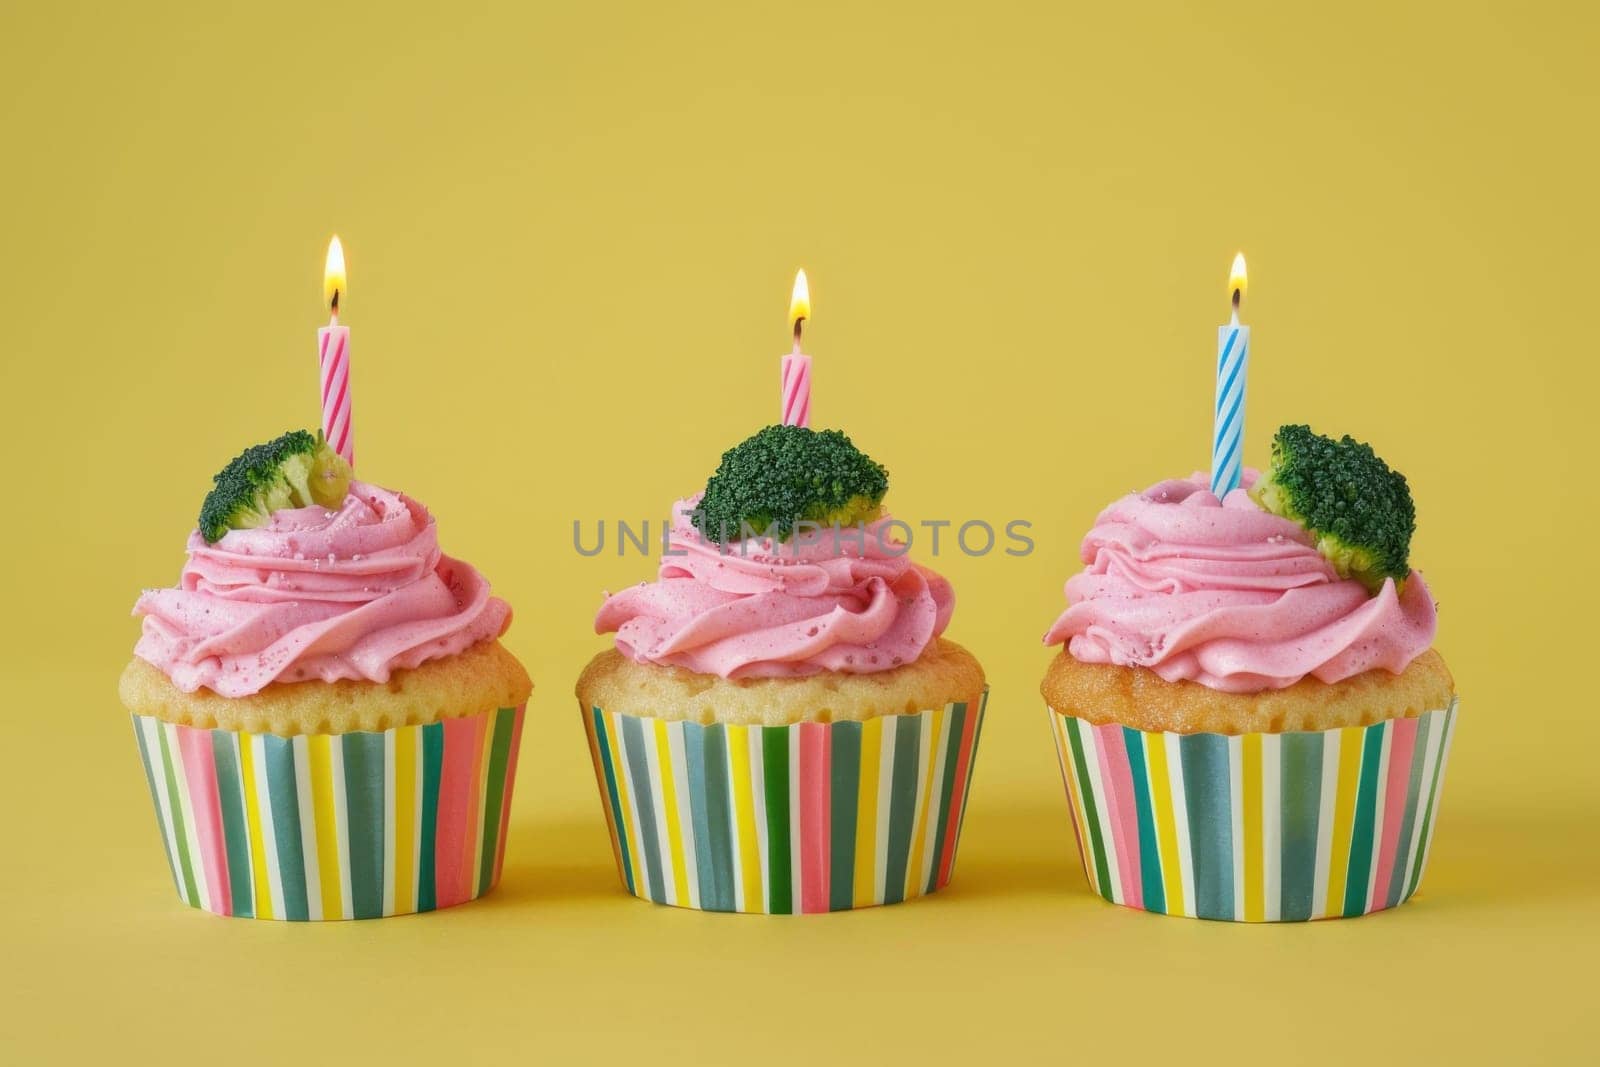 Celebratory pink cupcakes with candles on a vibrant yellow background for festive occasions by Vichizh